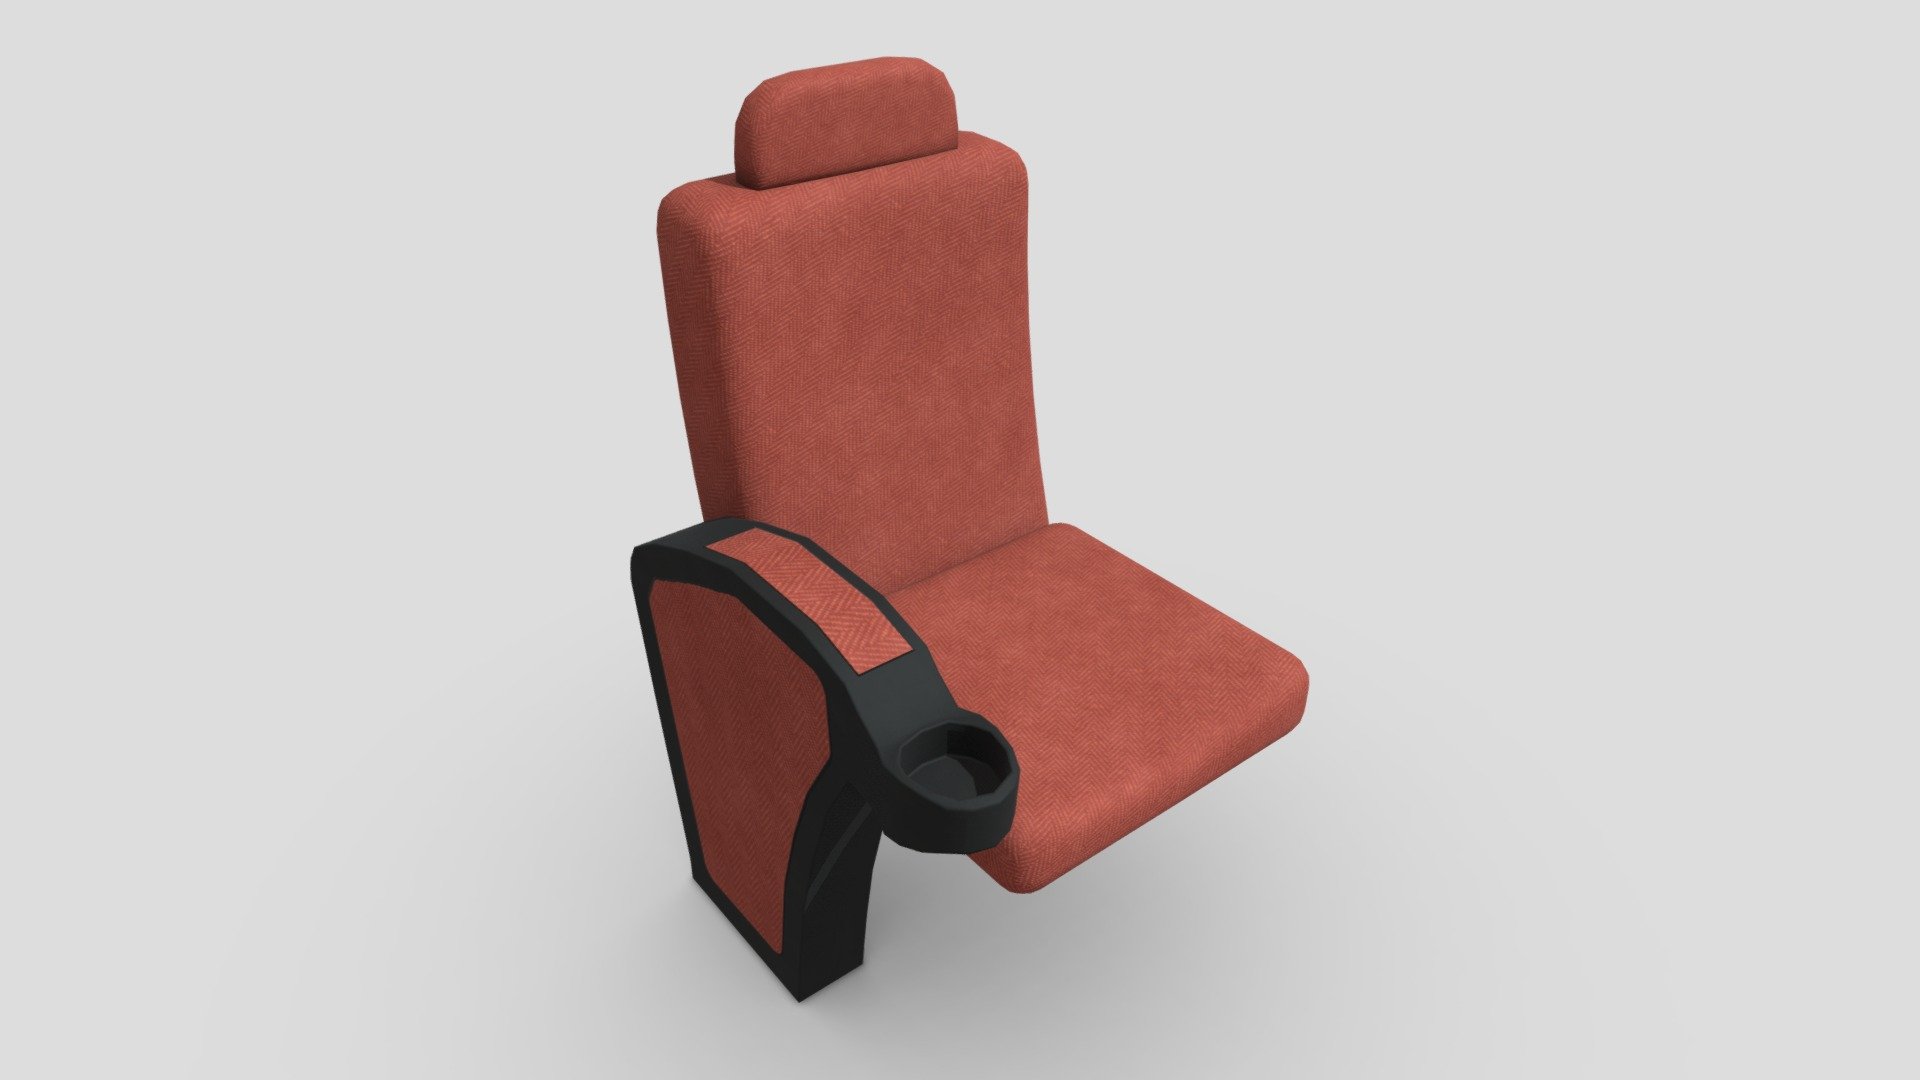 Cinema Seat I created for a cinema project 3d model